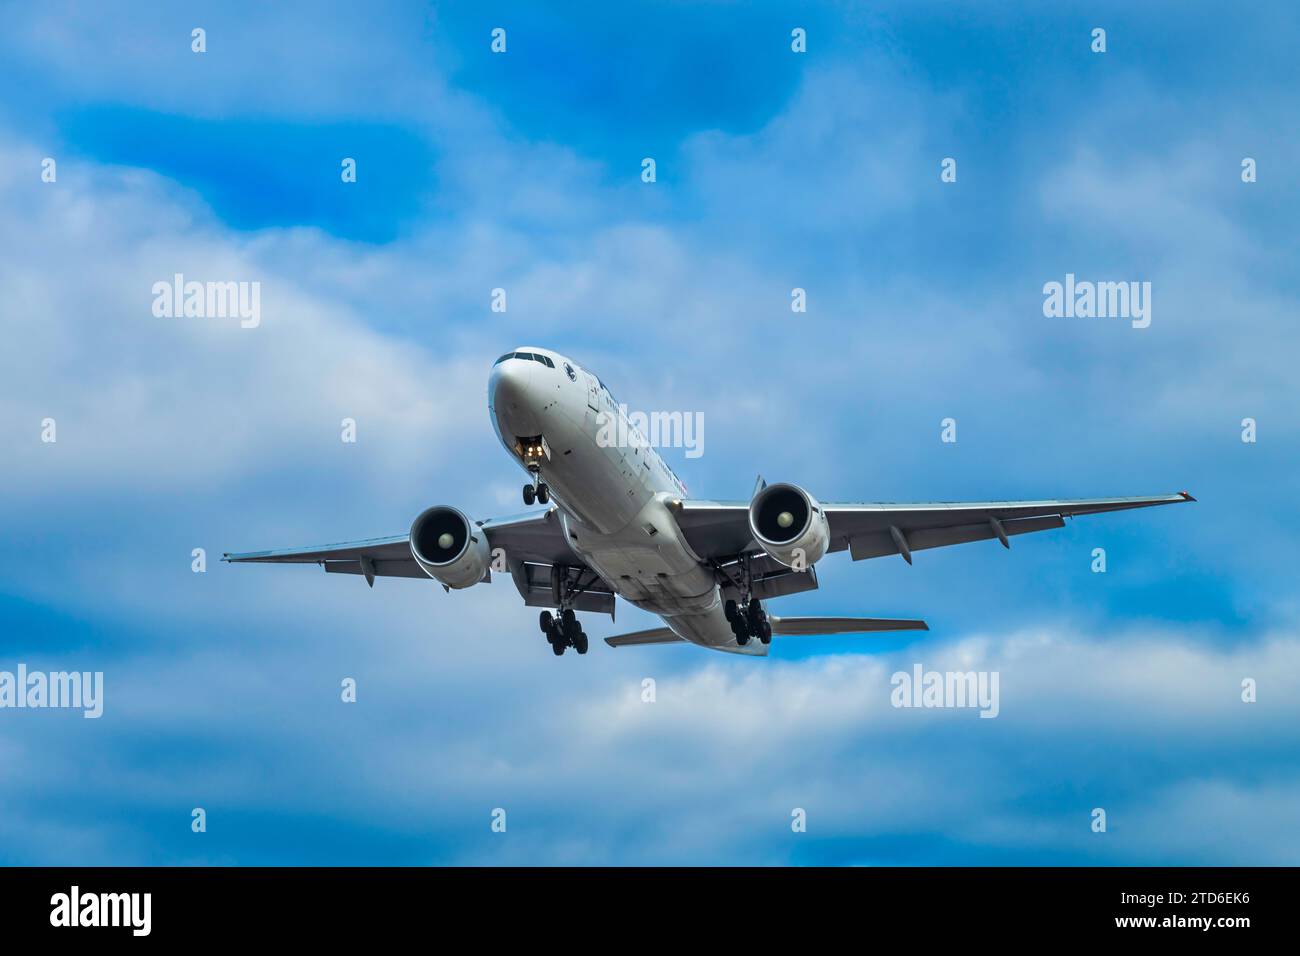 Planes on landing approach in Montreal Stock Photo